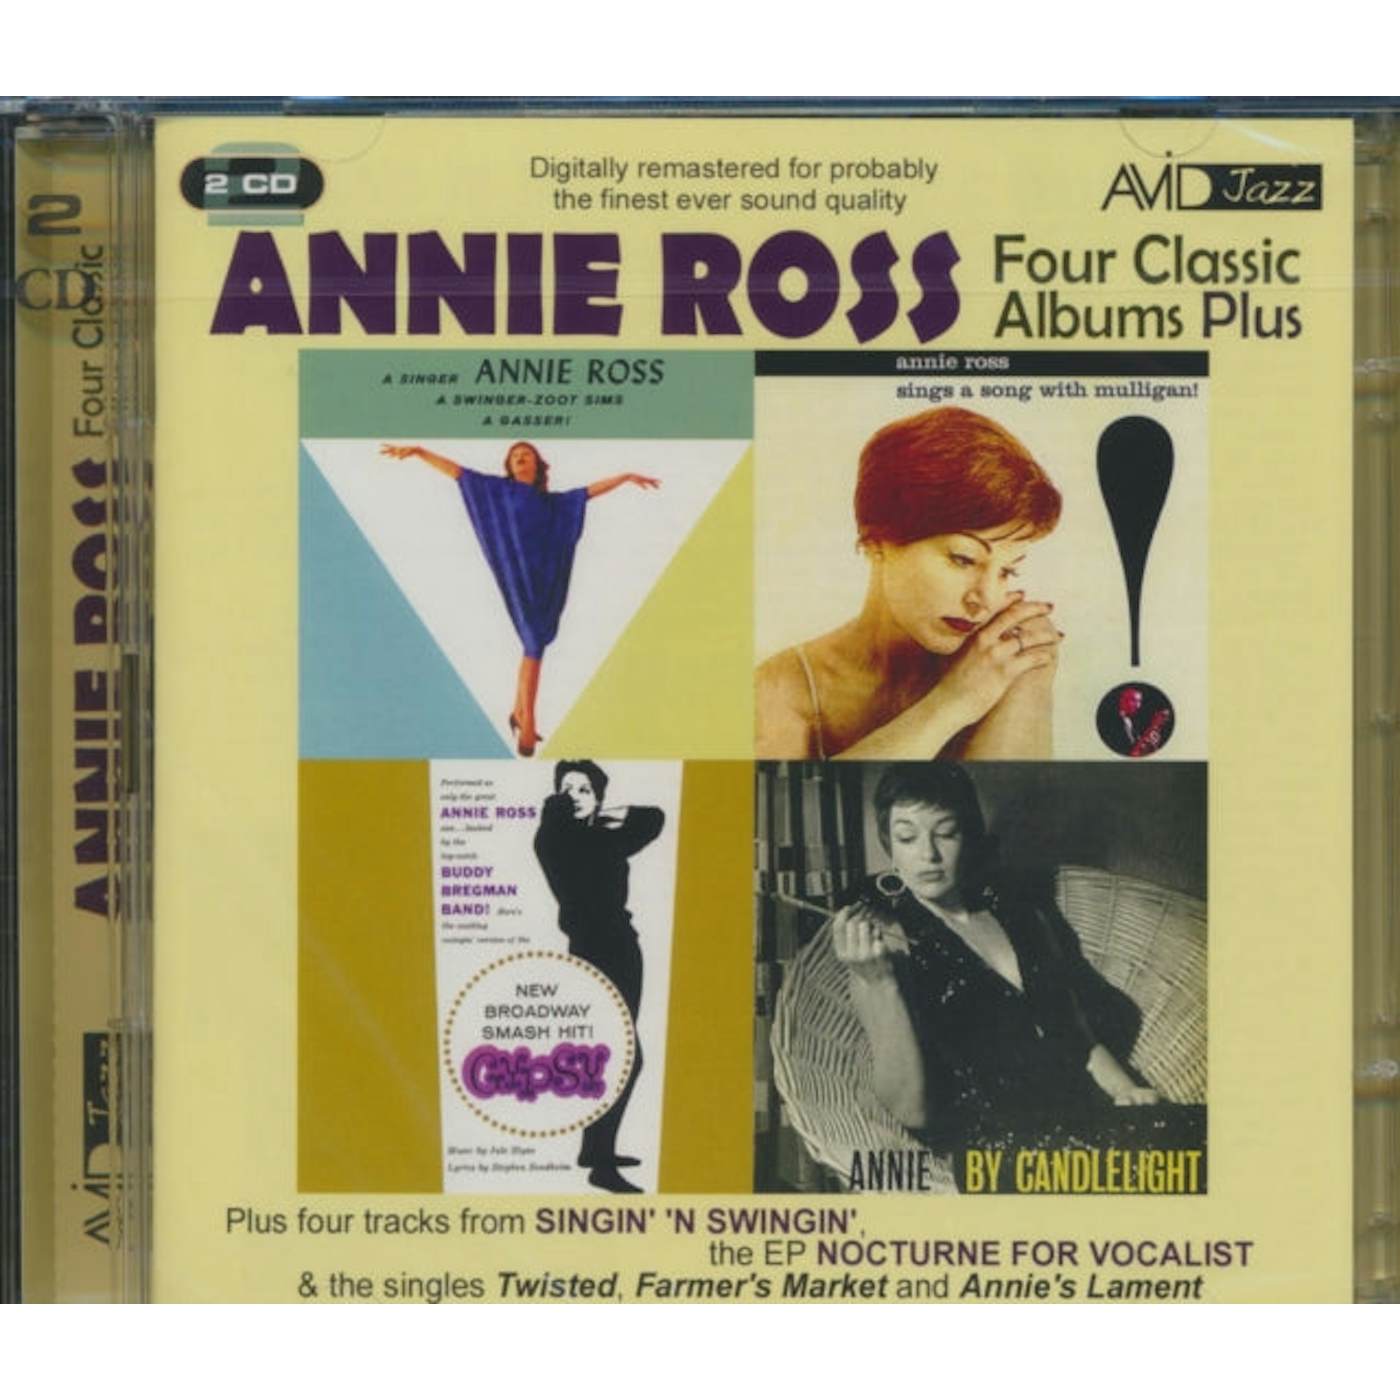 Annie Ross CD - Four Classic Albums Plus (Annie By Candlelight / Gypsy / A Gasser / Sings A Song With Mulligan)